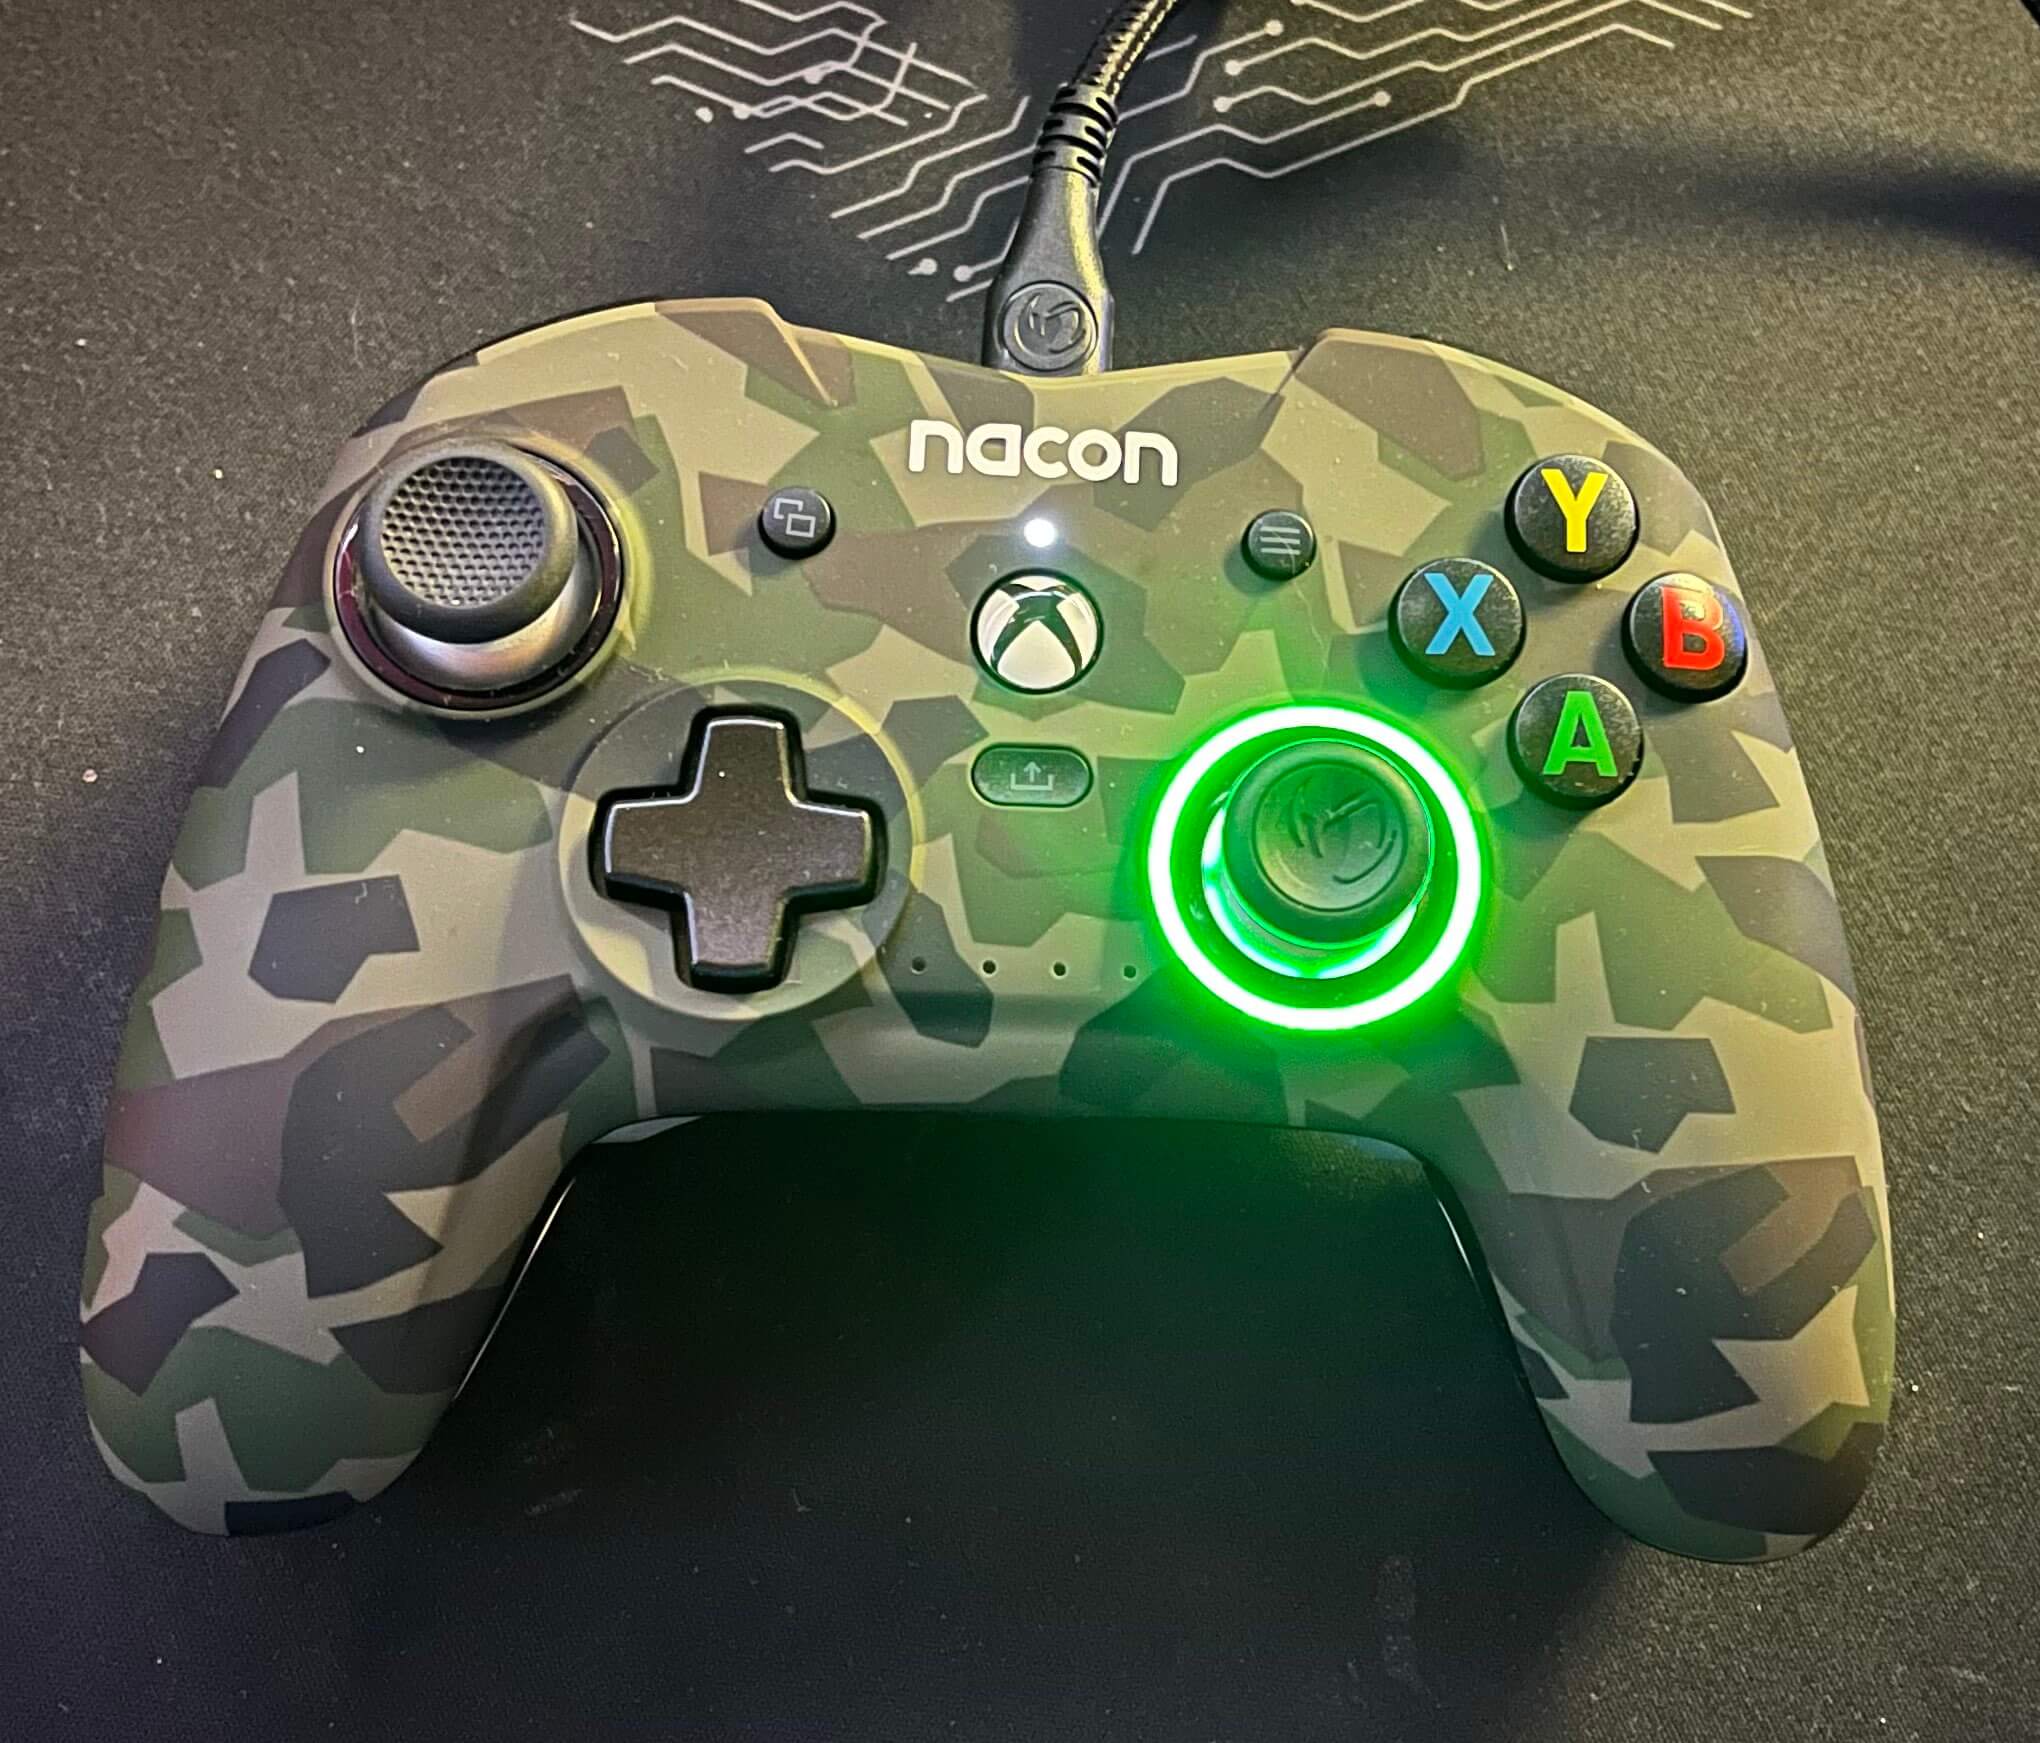 The Nacon Revolution X Pro controller has a lit right thumbstick that is green for normal profile. The camo is a dark brown, green, and tan design.